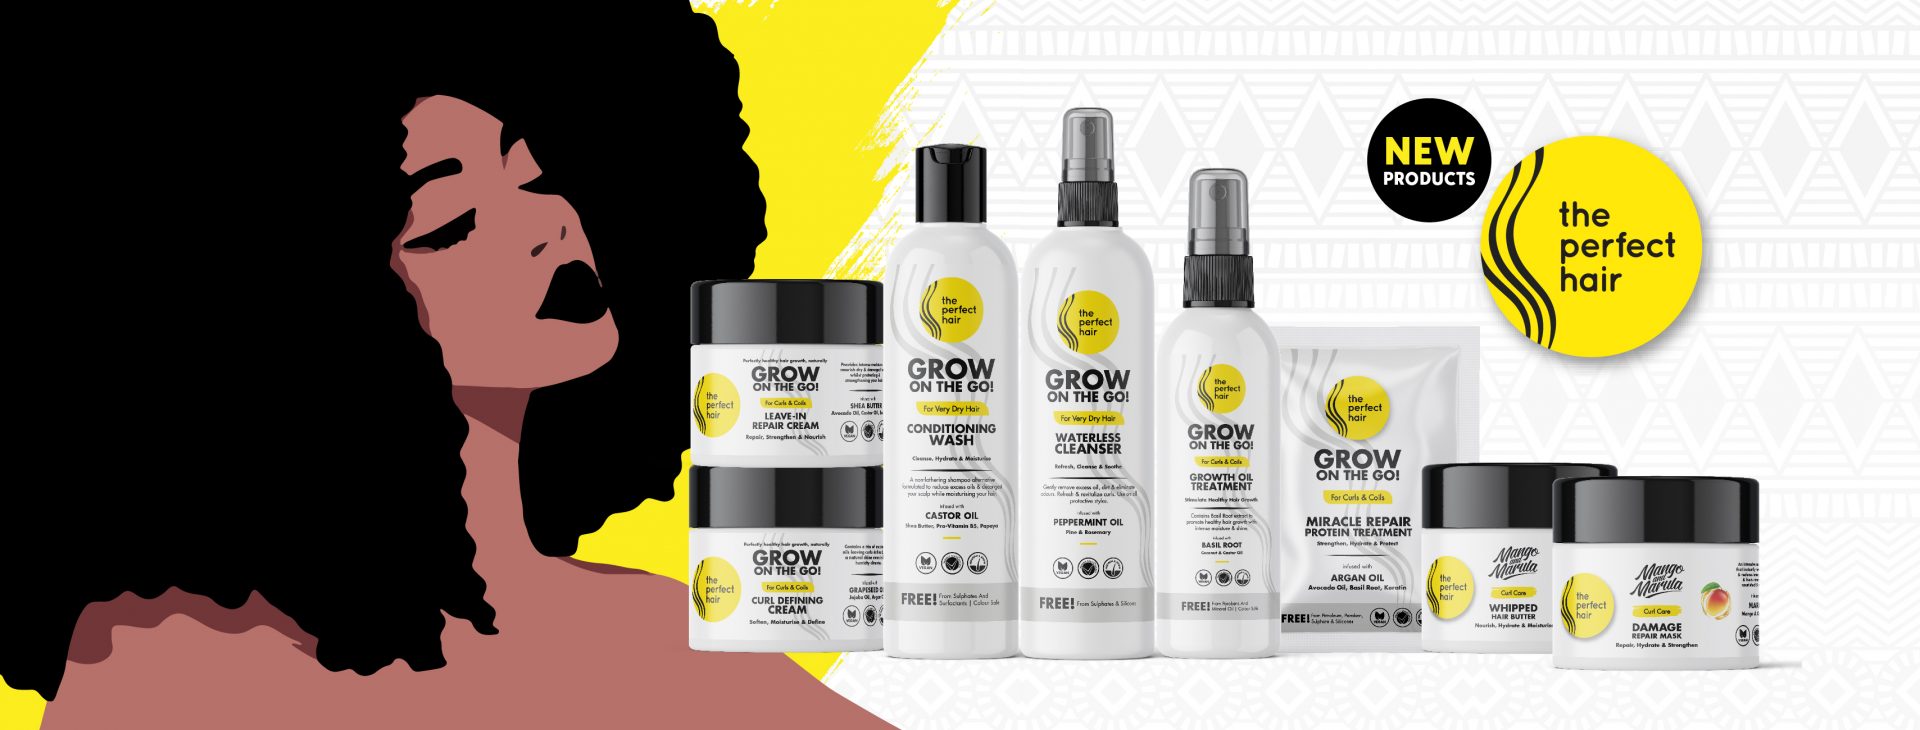 The Perfect Hair launches eight new products to banish winter hair woes 2